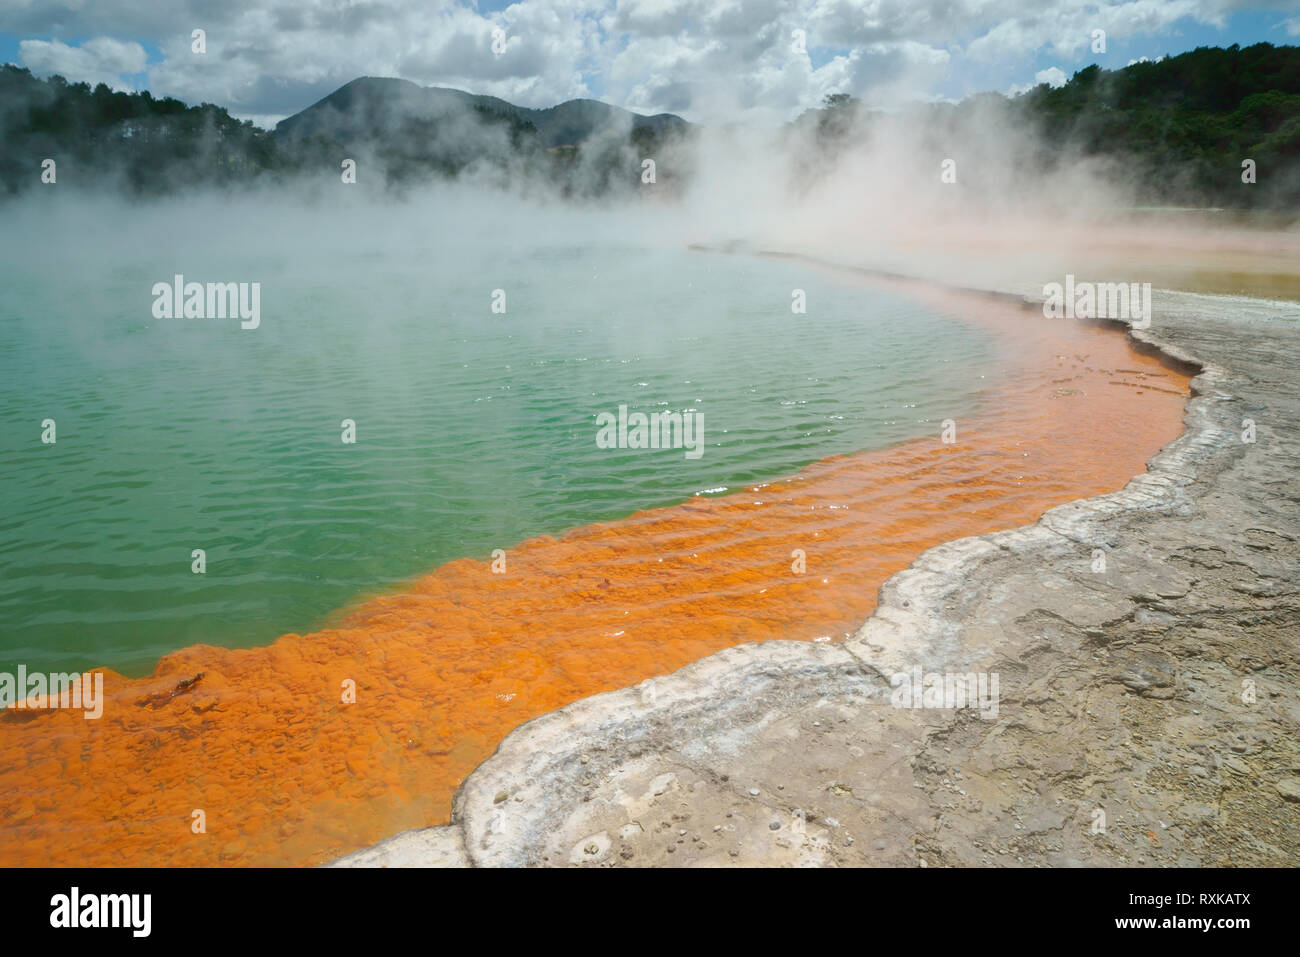 Champagne Pool 1, Geothermal hot springs located in Waiotapu, North Island of New Zealand. Stock Photo